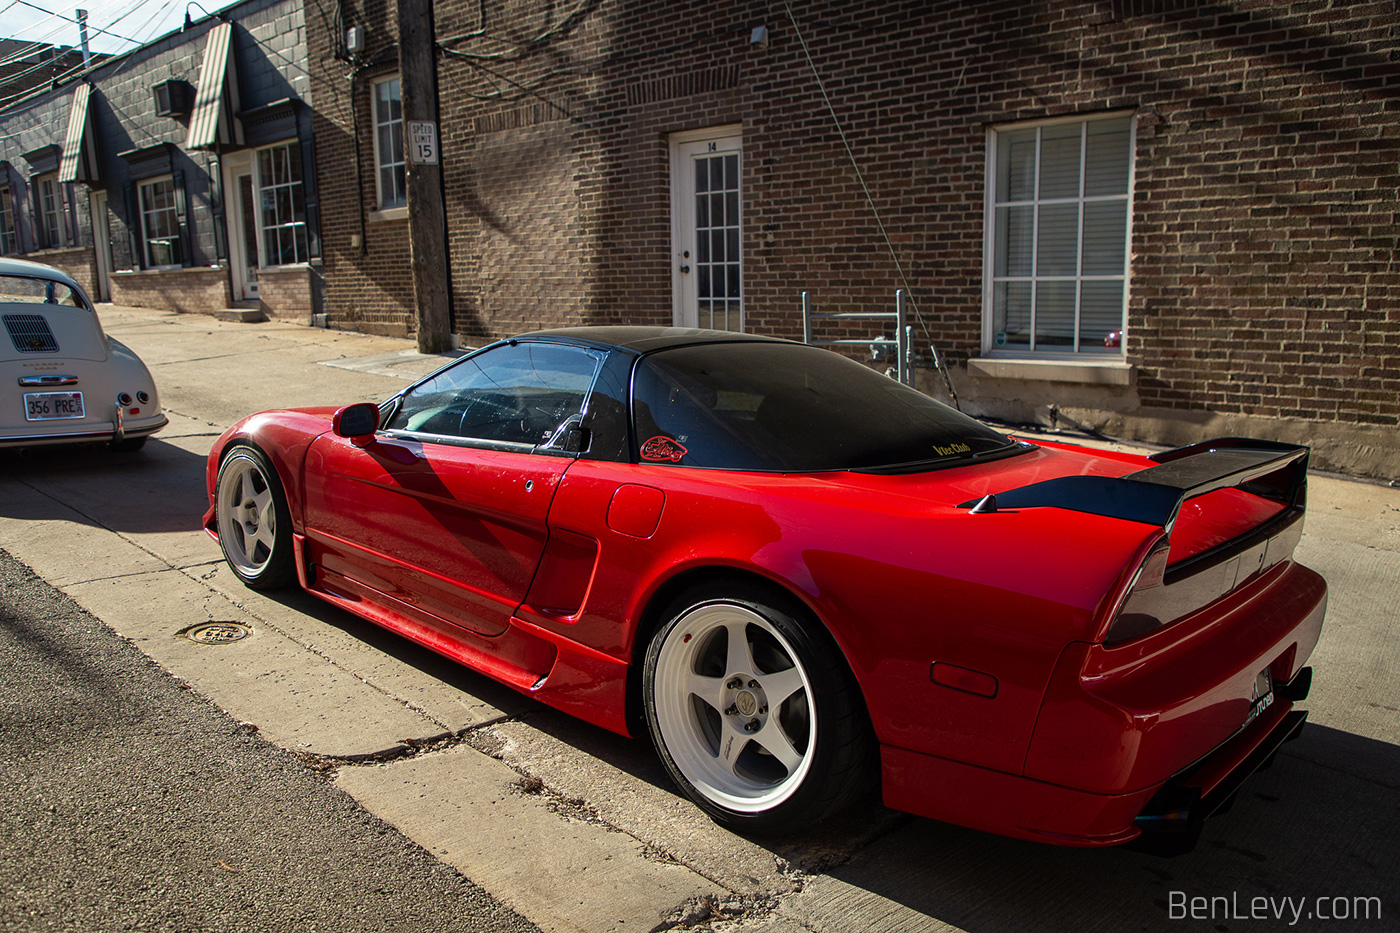 Red Acura NSX in an Alley